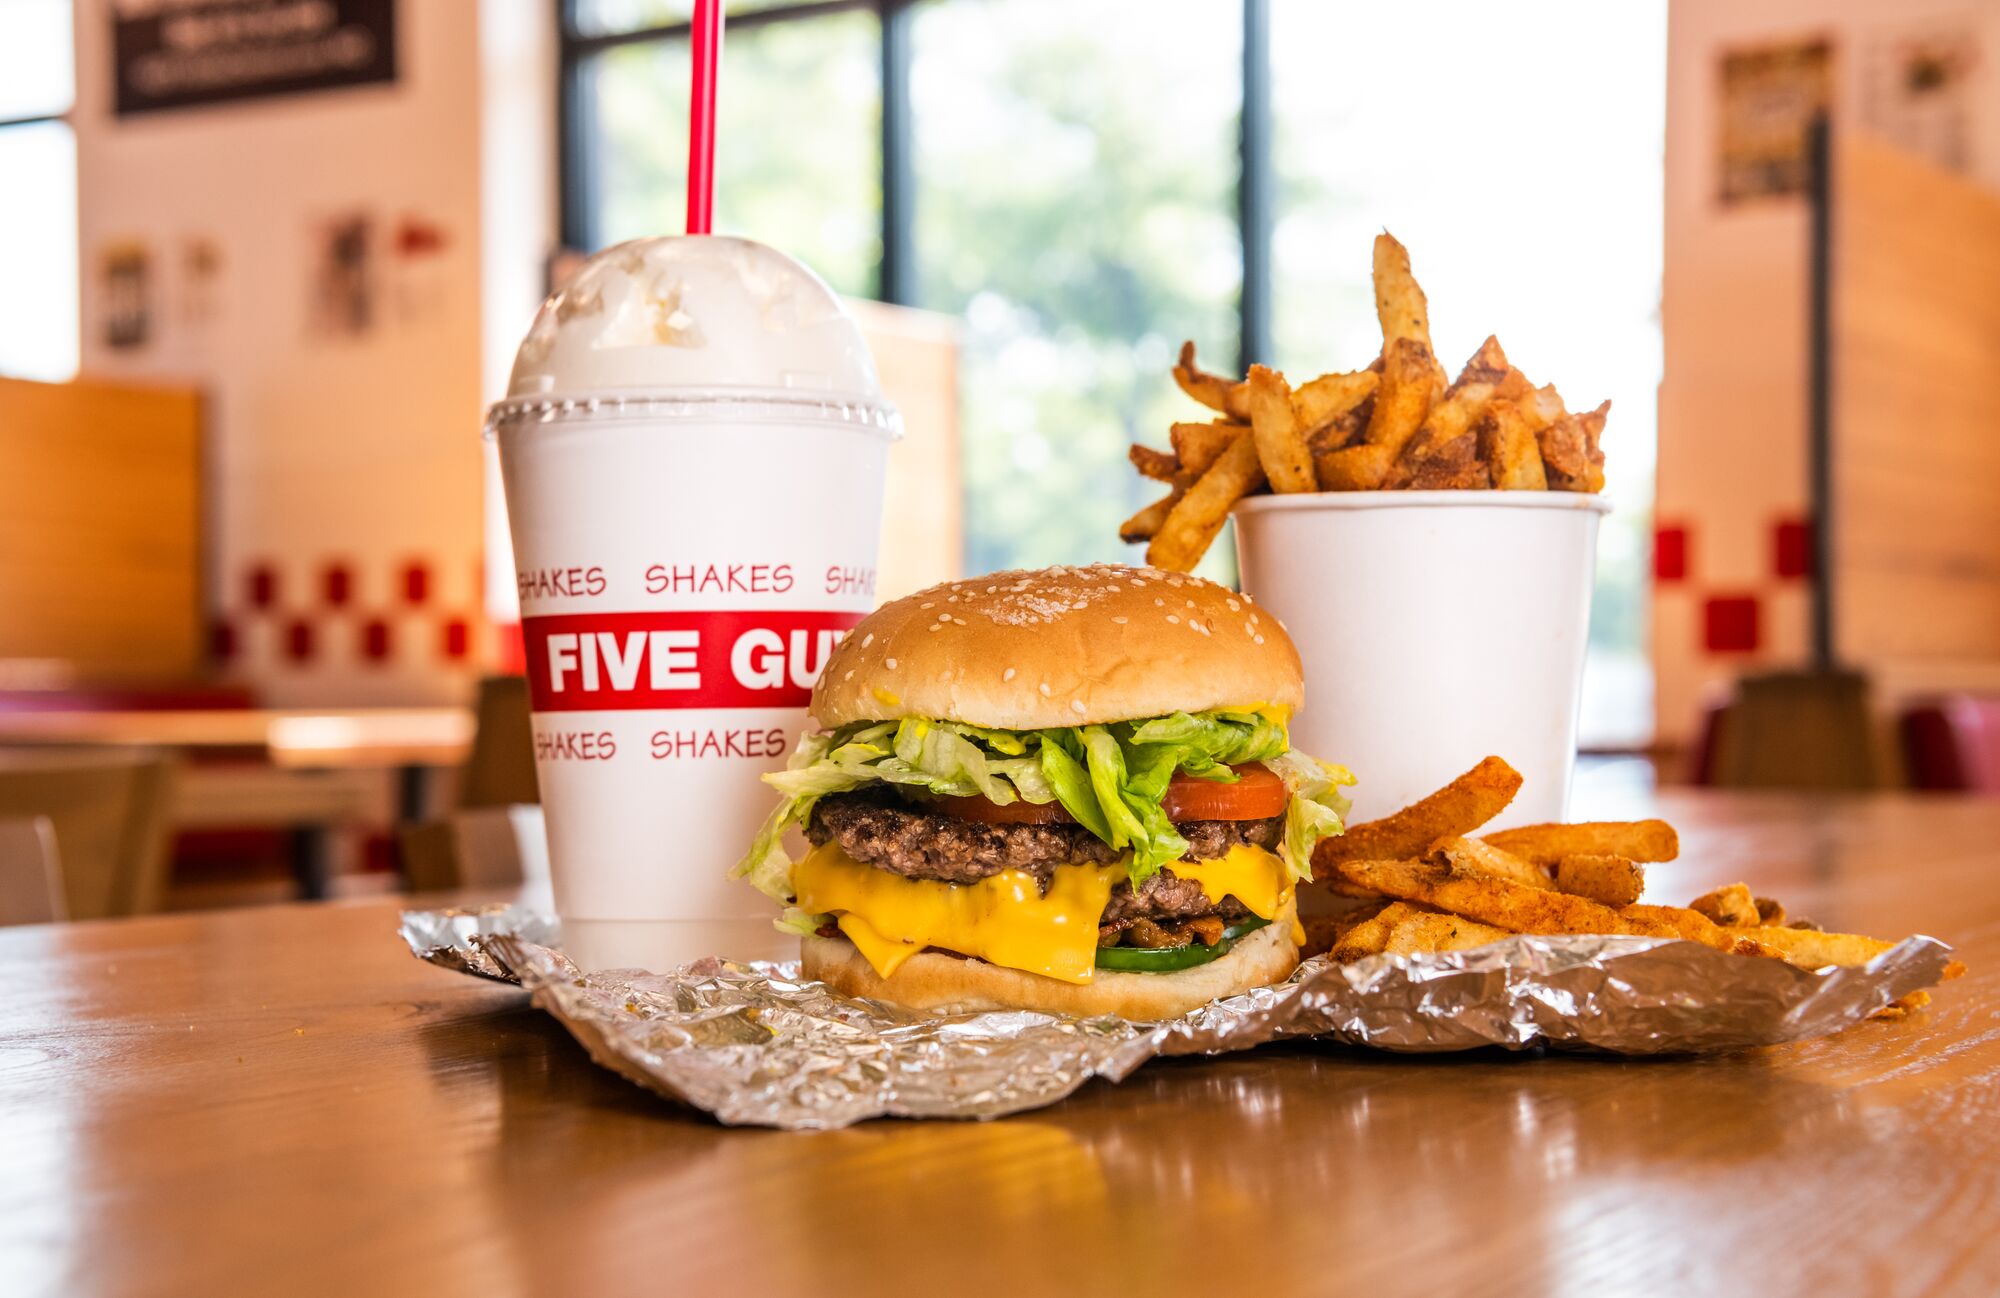 A Five Guys cheeseburger, milkshake and regular order of fries sits on a table inside a Five Guys re Five Guys Ottawa (613)562-8119